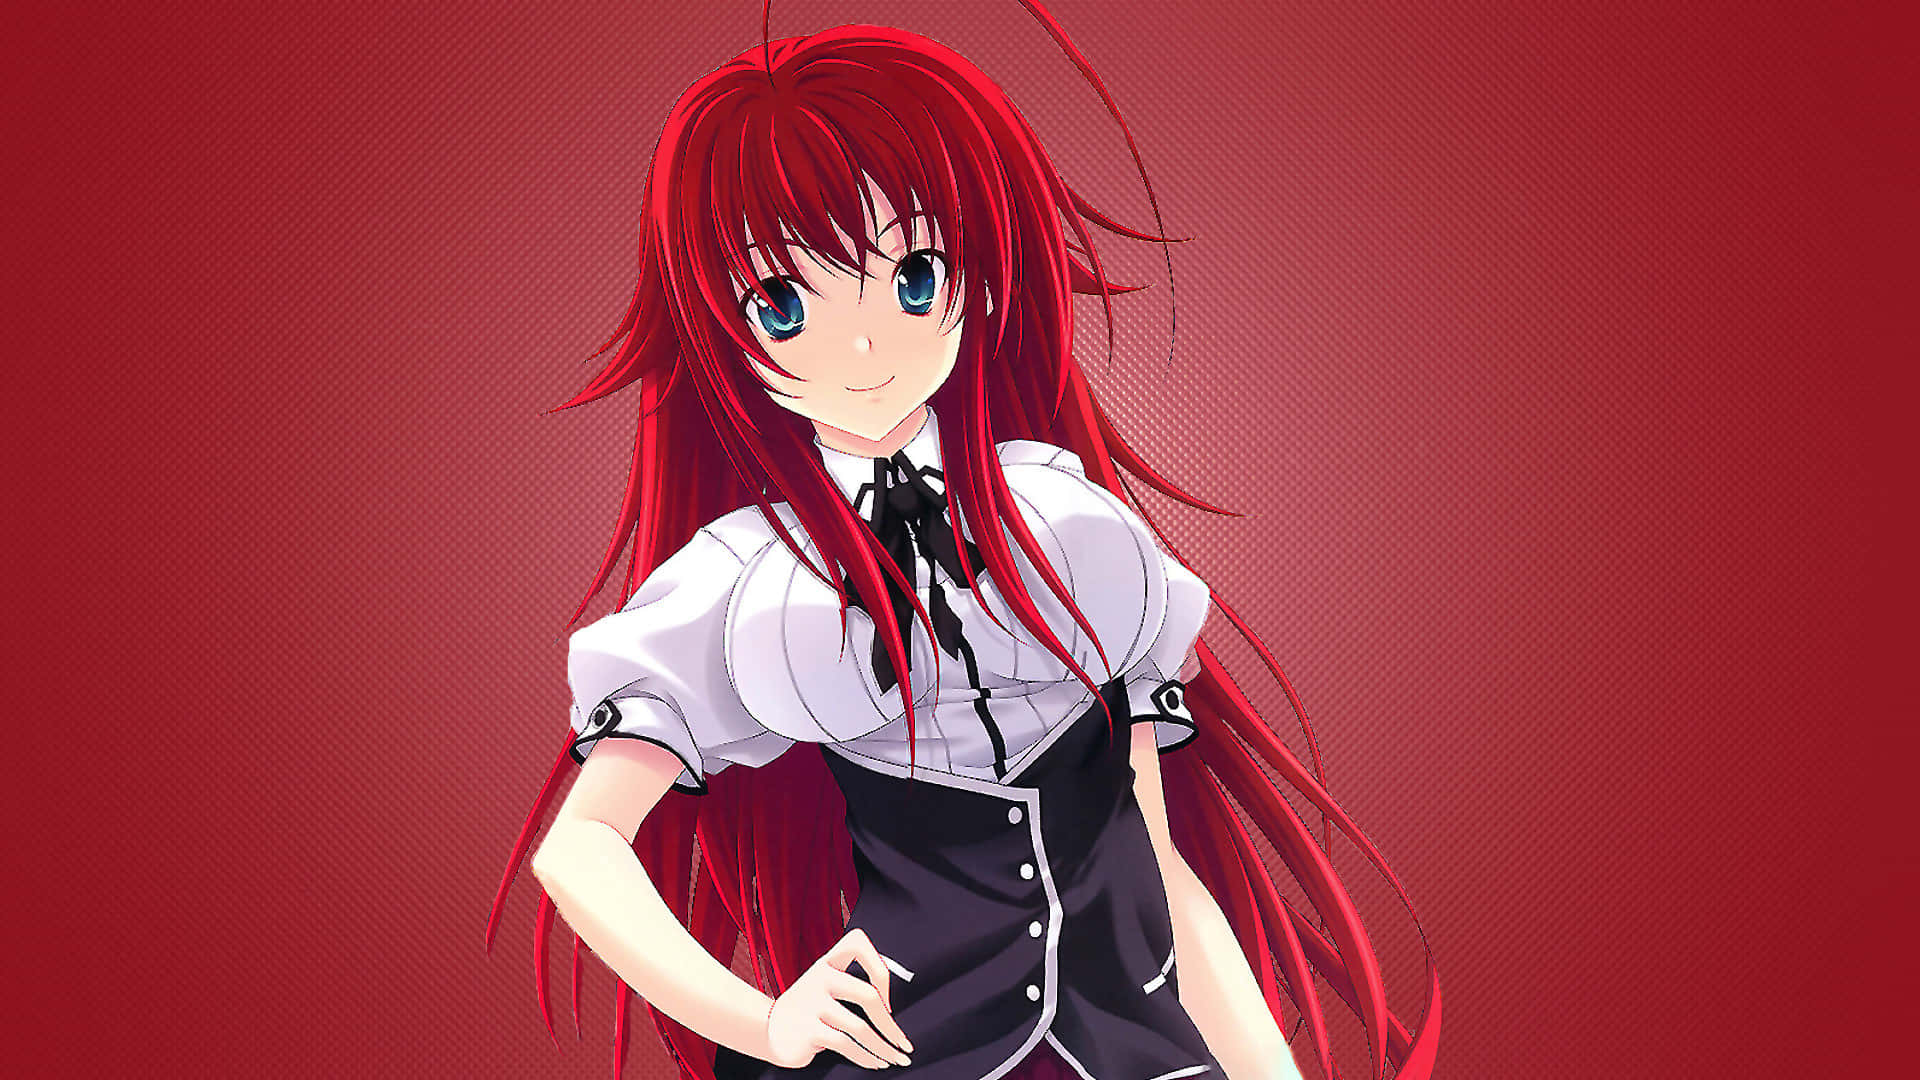 Captivating Rias Gremory in Full Glory Wallpaper